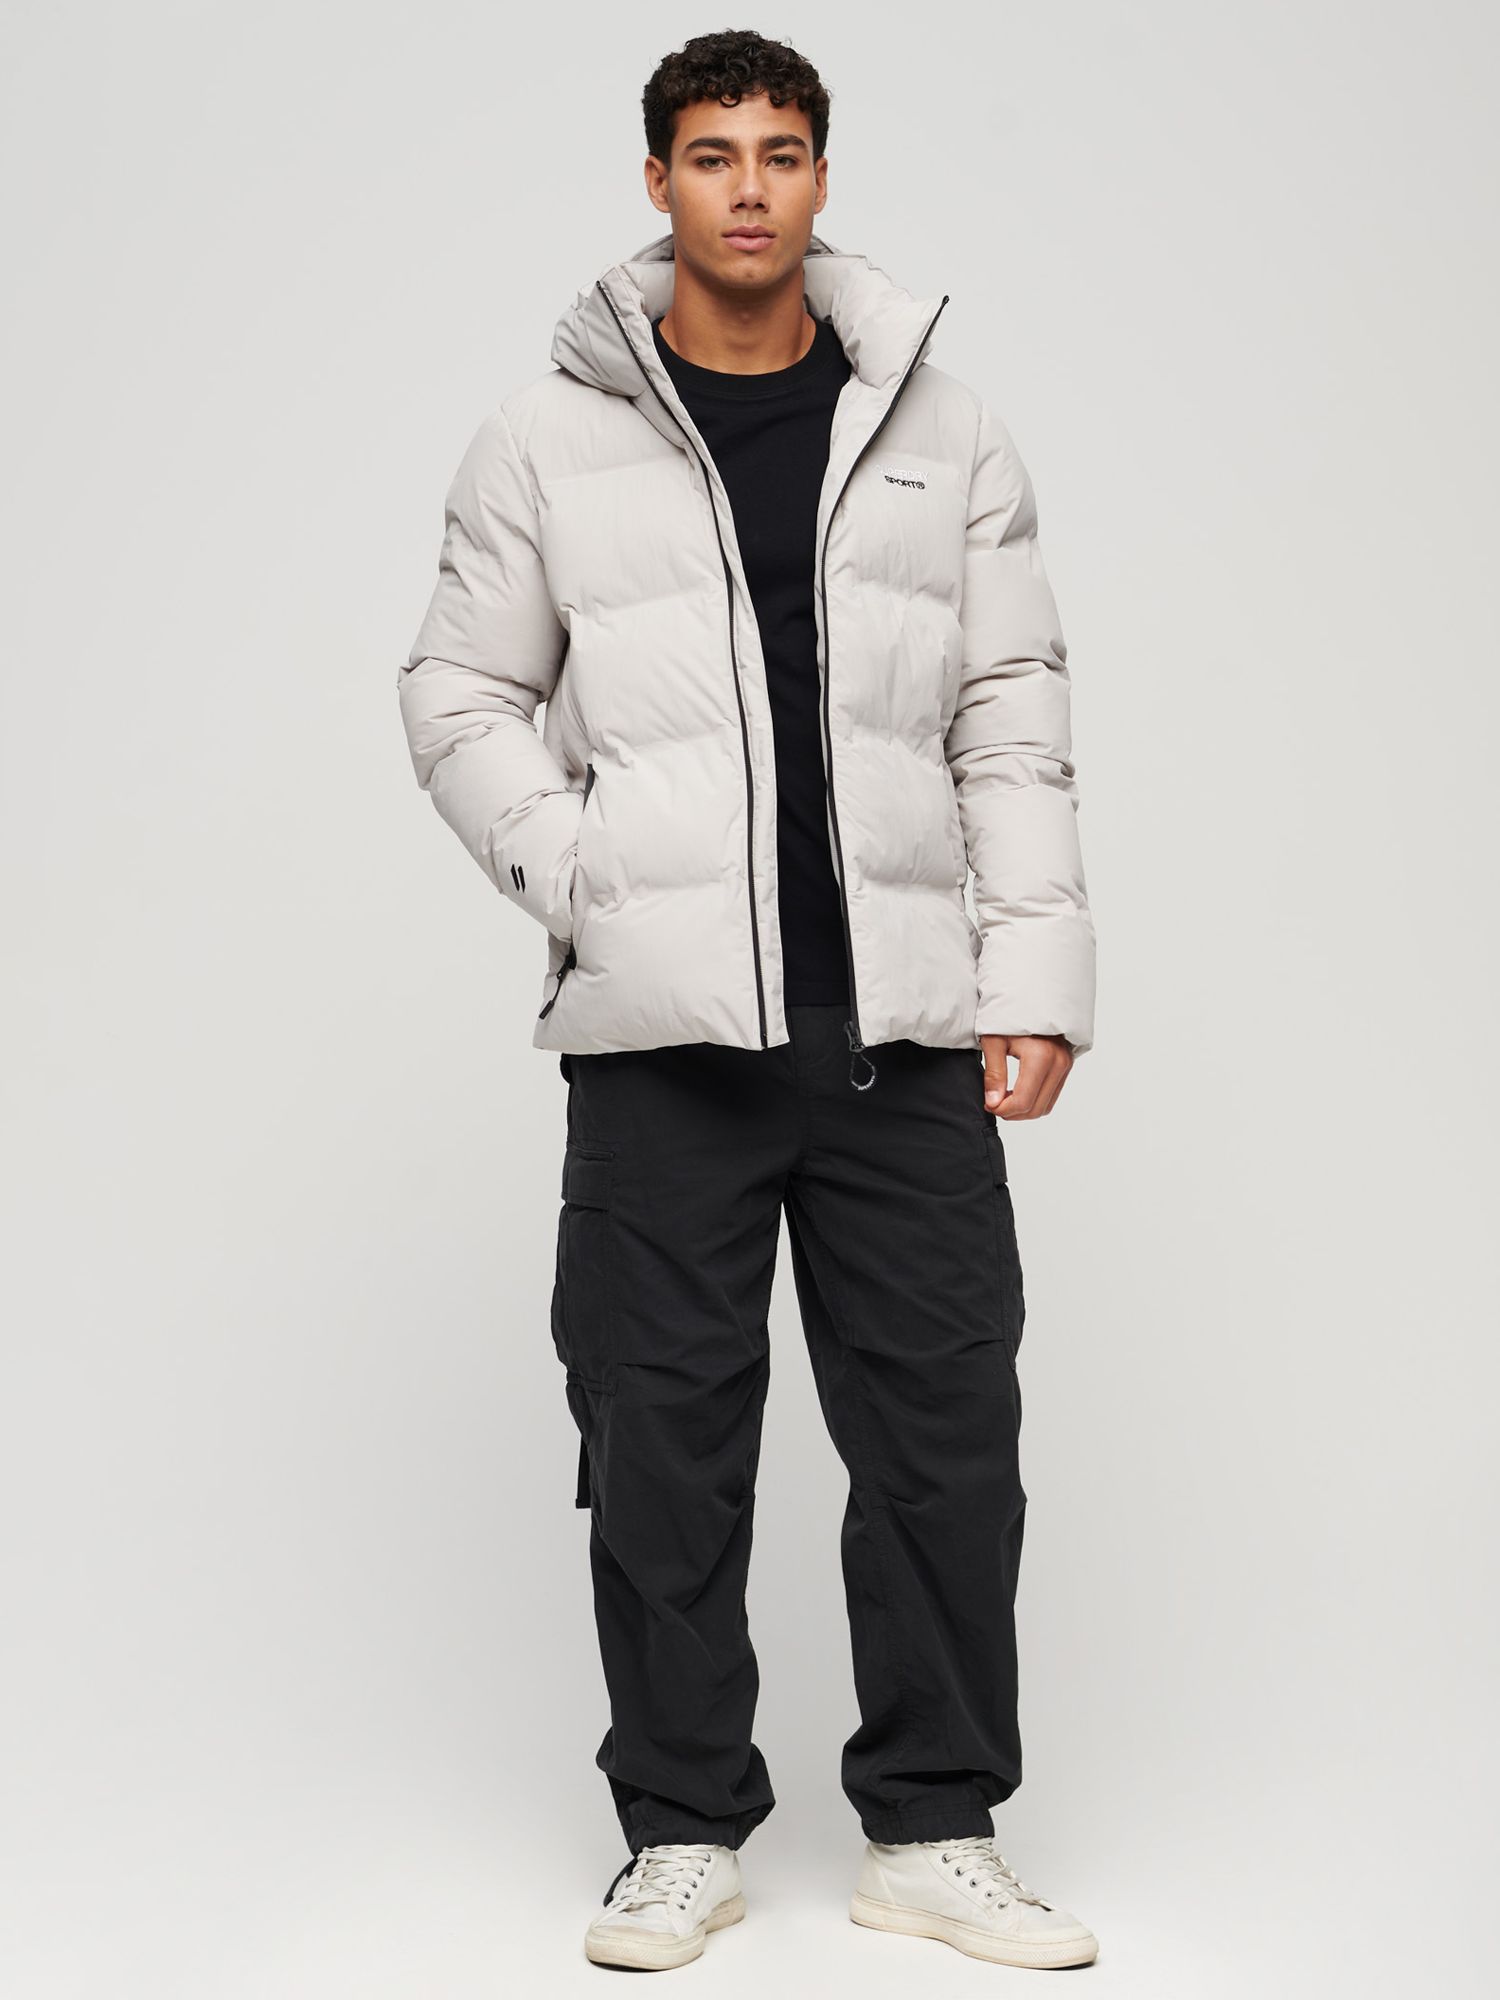 Hooded Partners Superdry Grey Boxy John Lewis Moonlight Jacket, at Puffer &